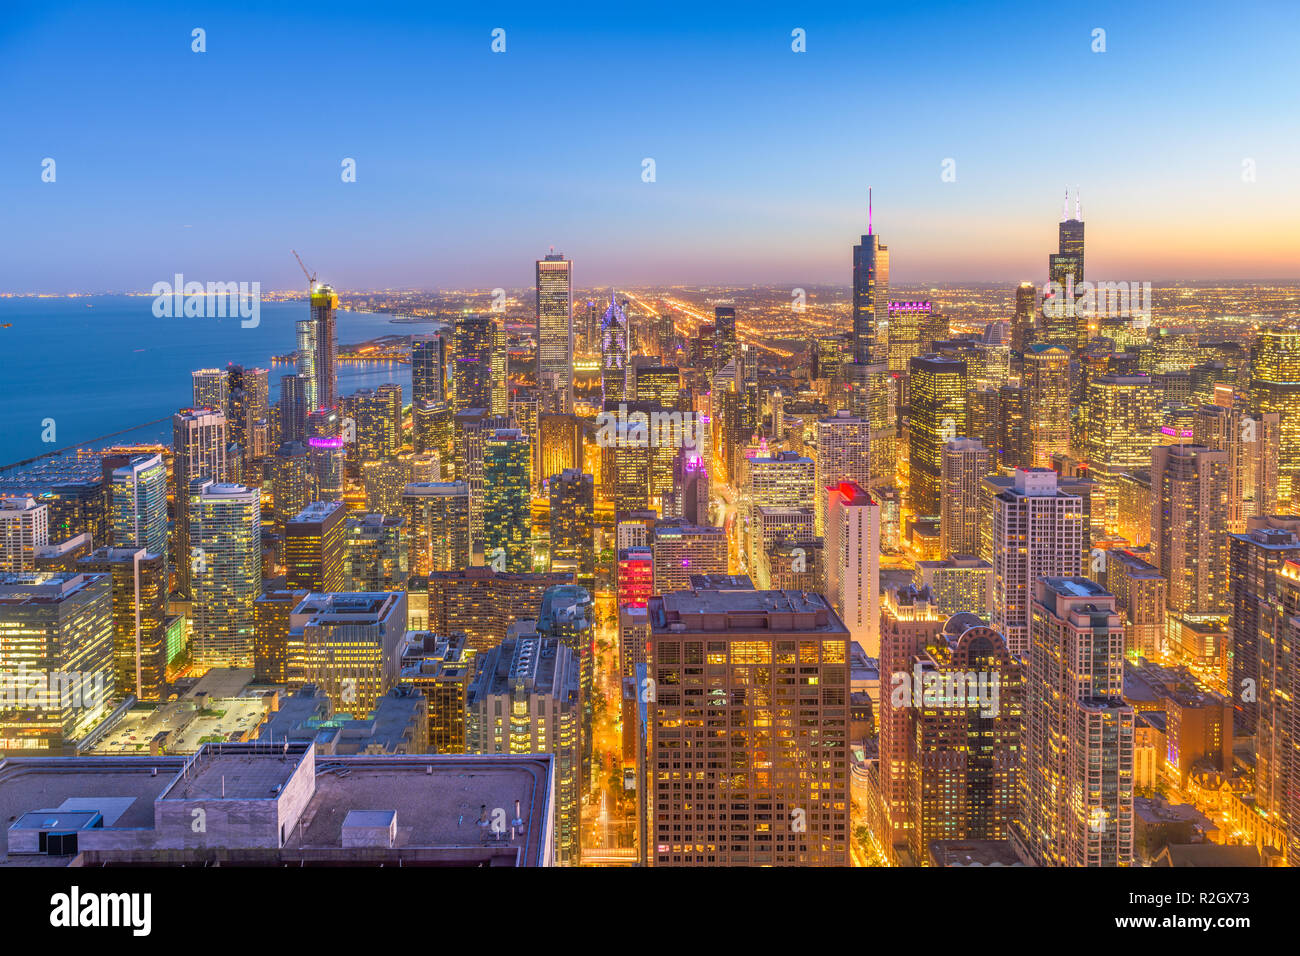 Chicago, Illinois, USA downtown city skyline from above at dusk. Stock Photo